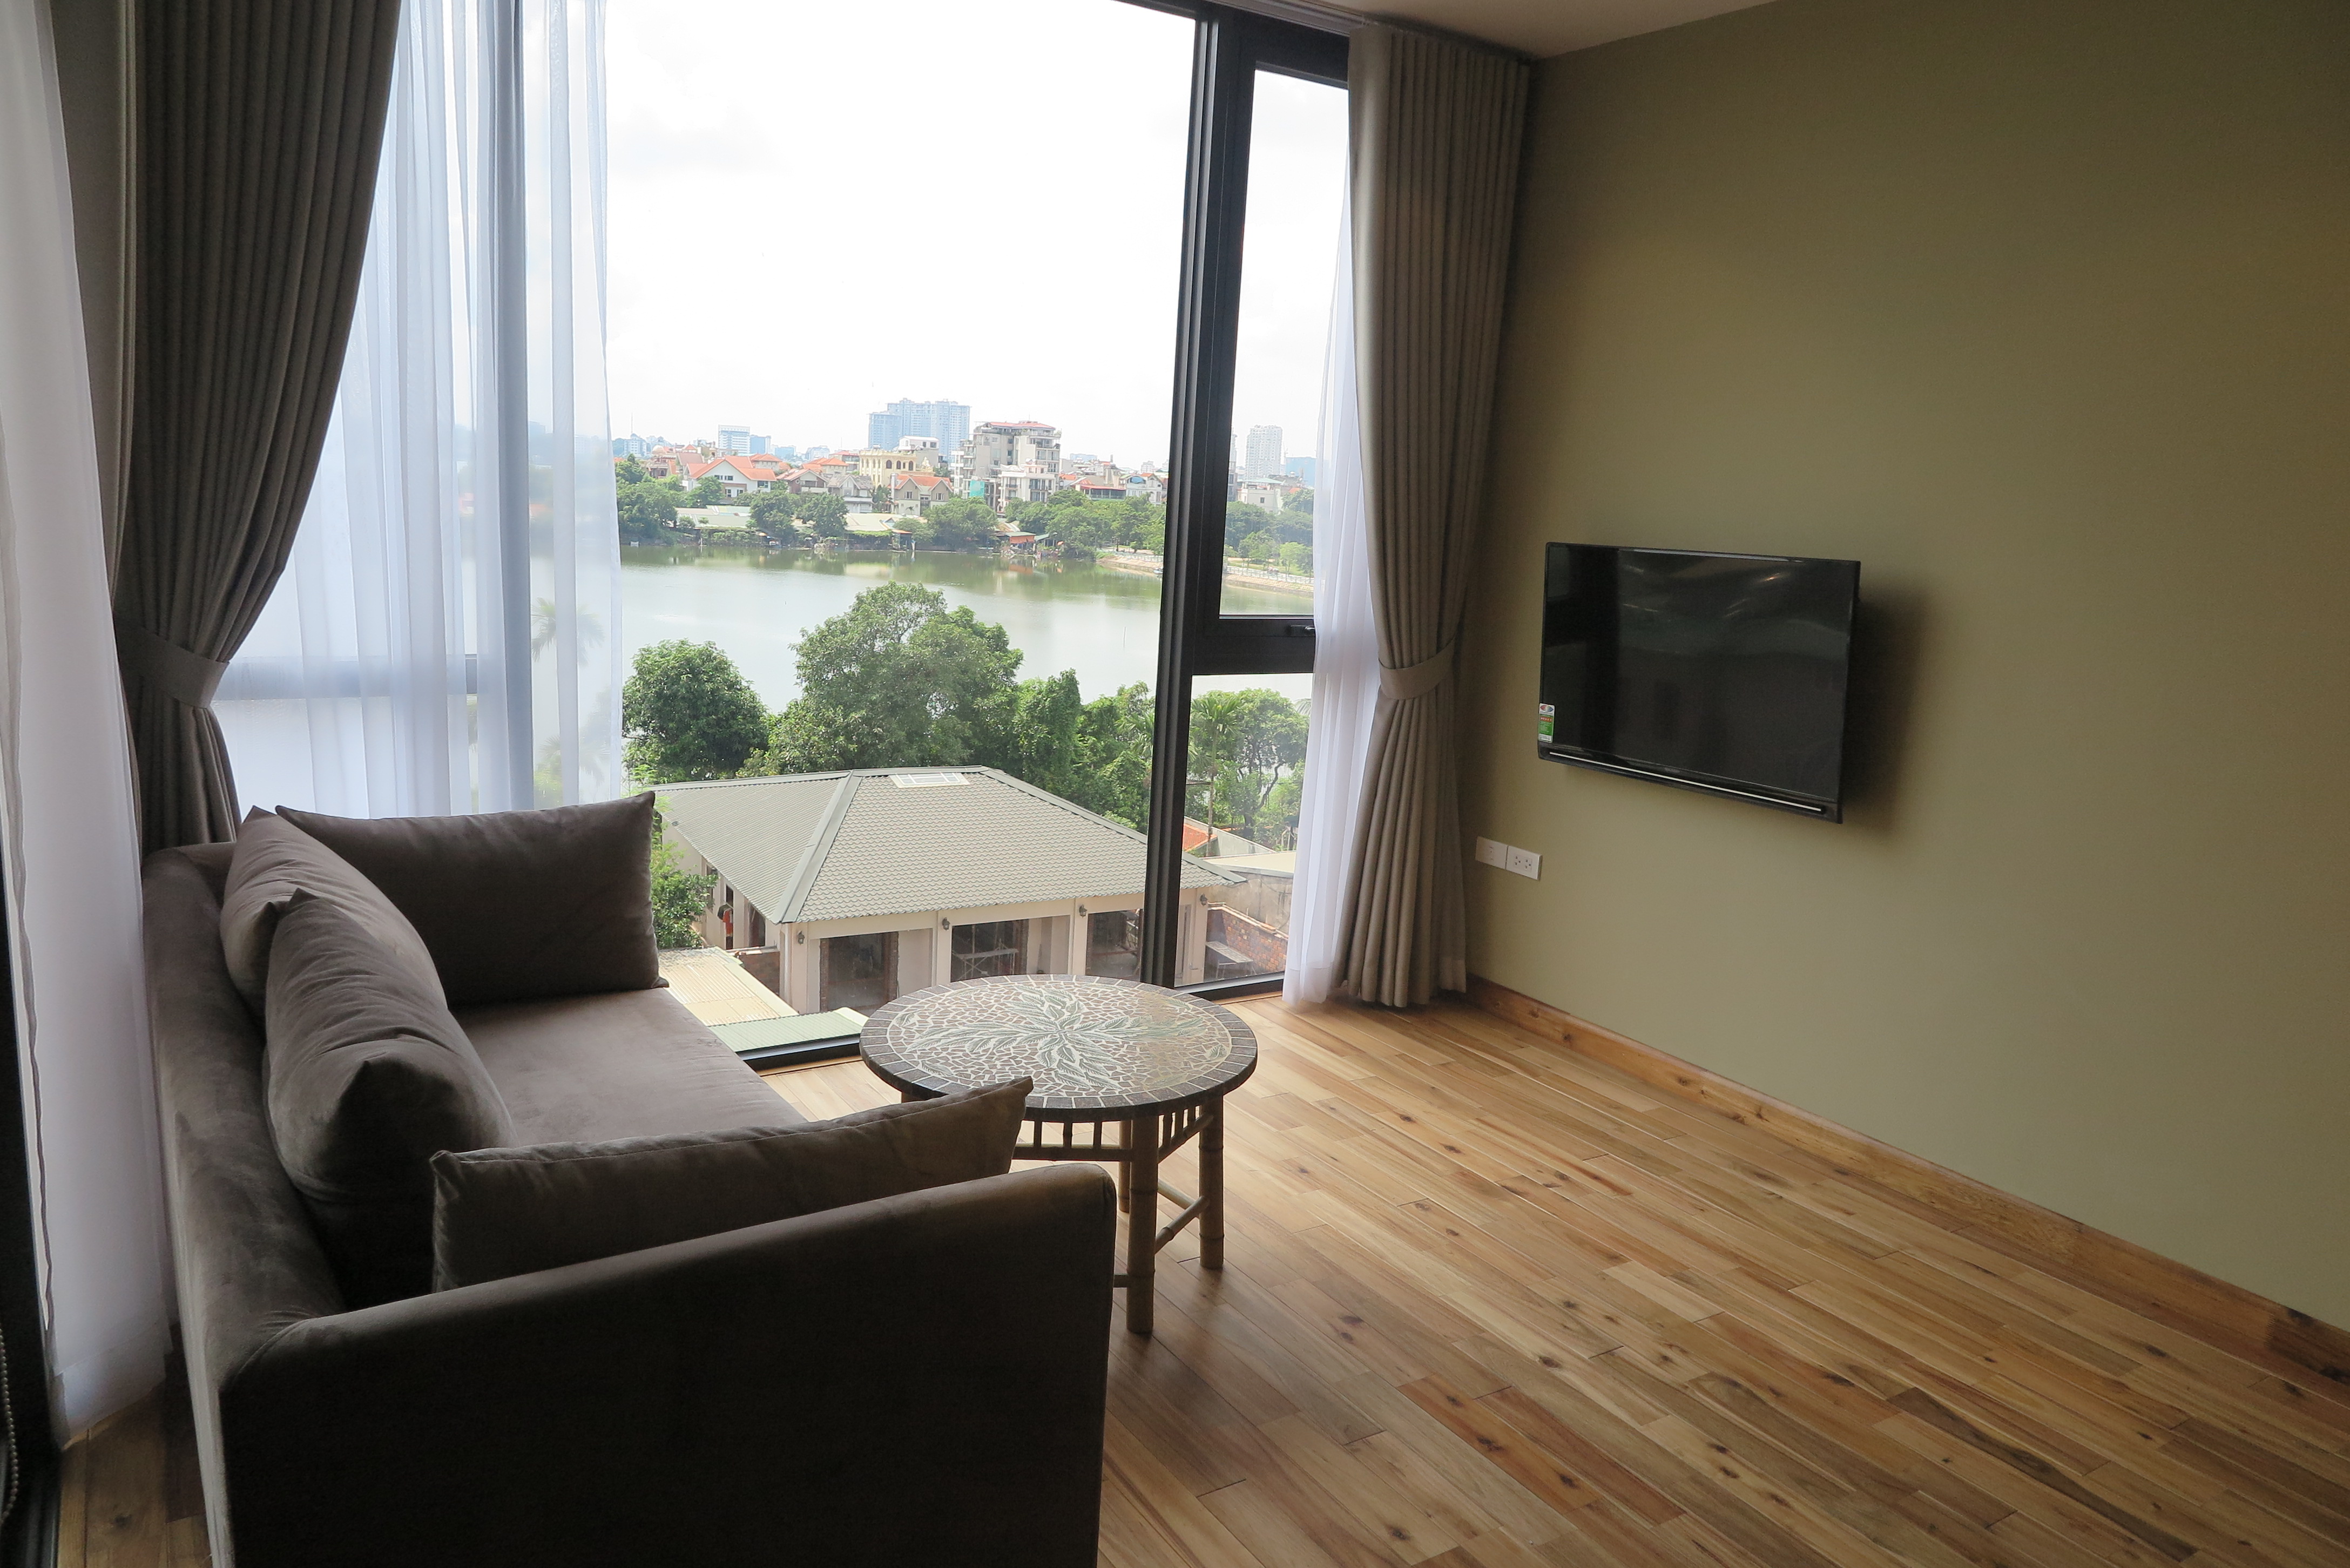 Hanoi flat in Tay Ho with West lake view, balcony